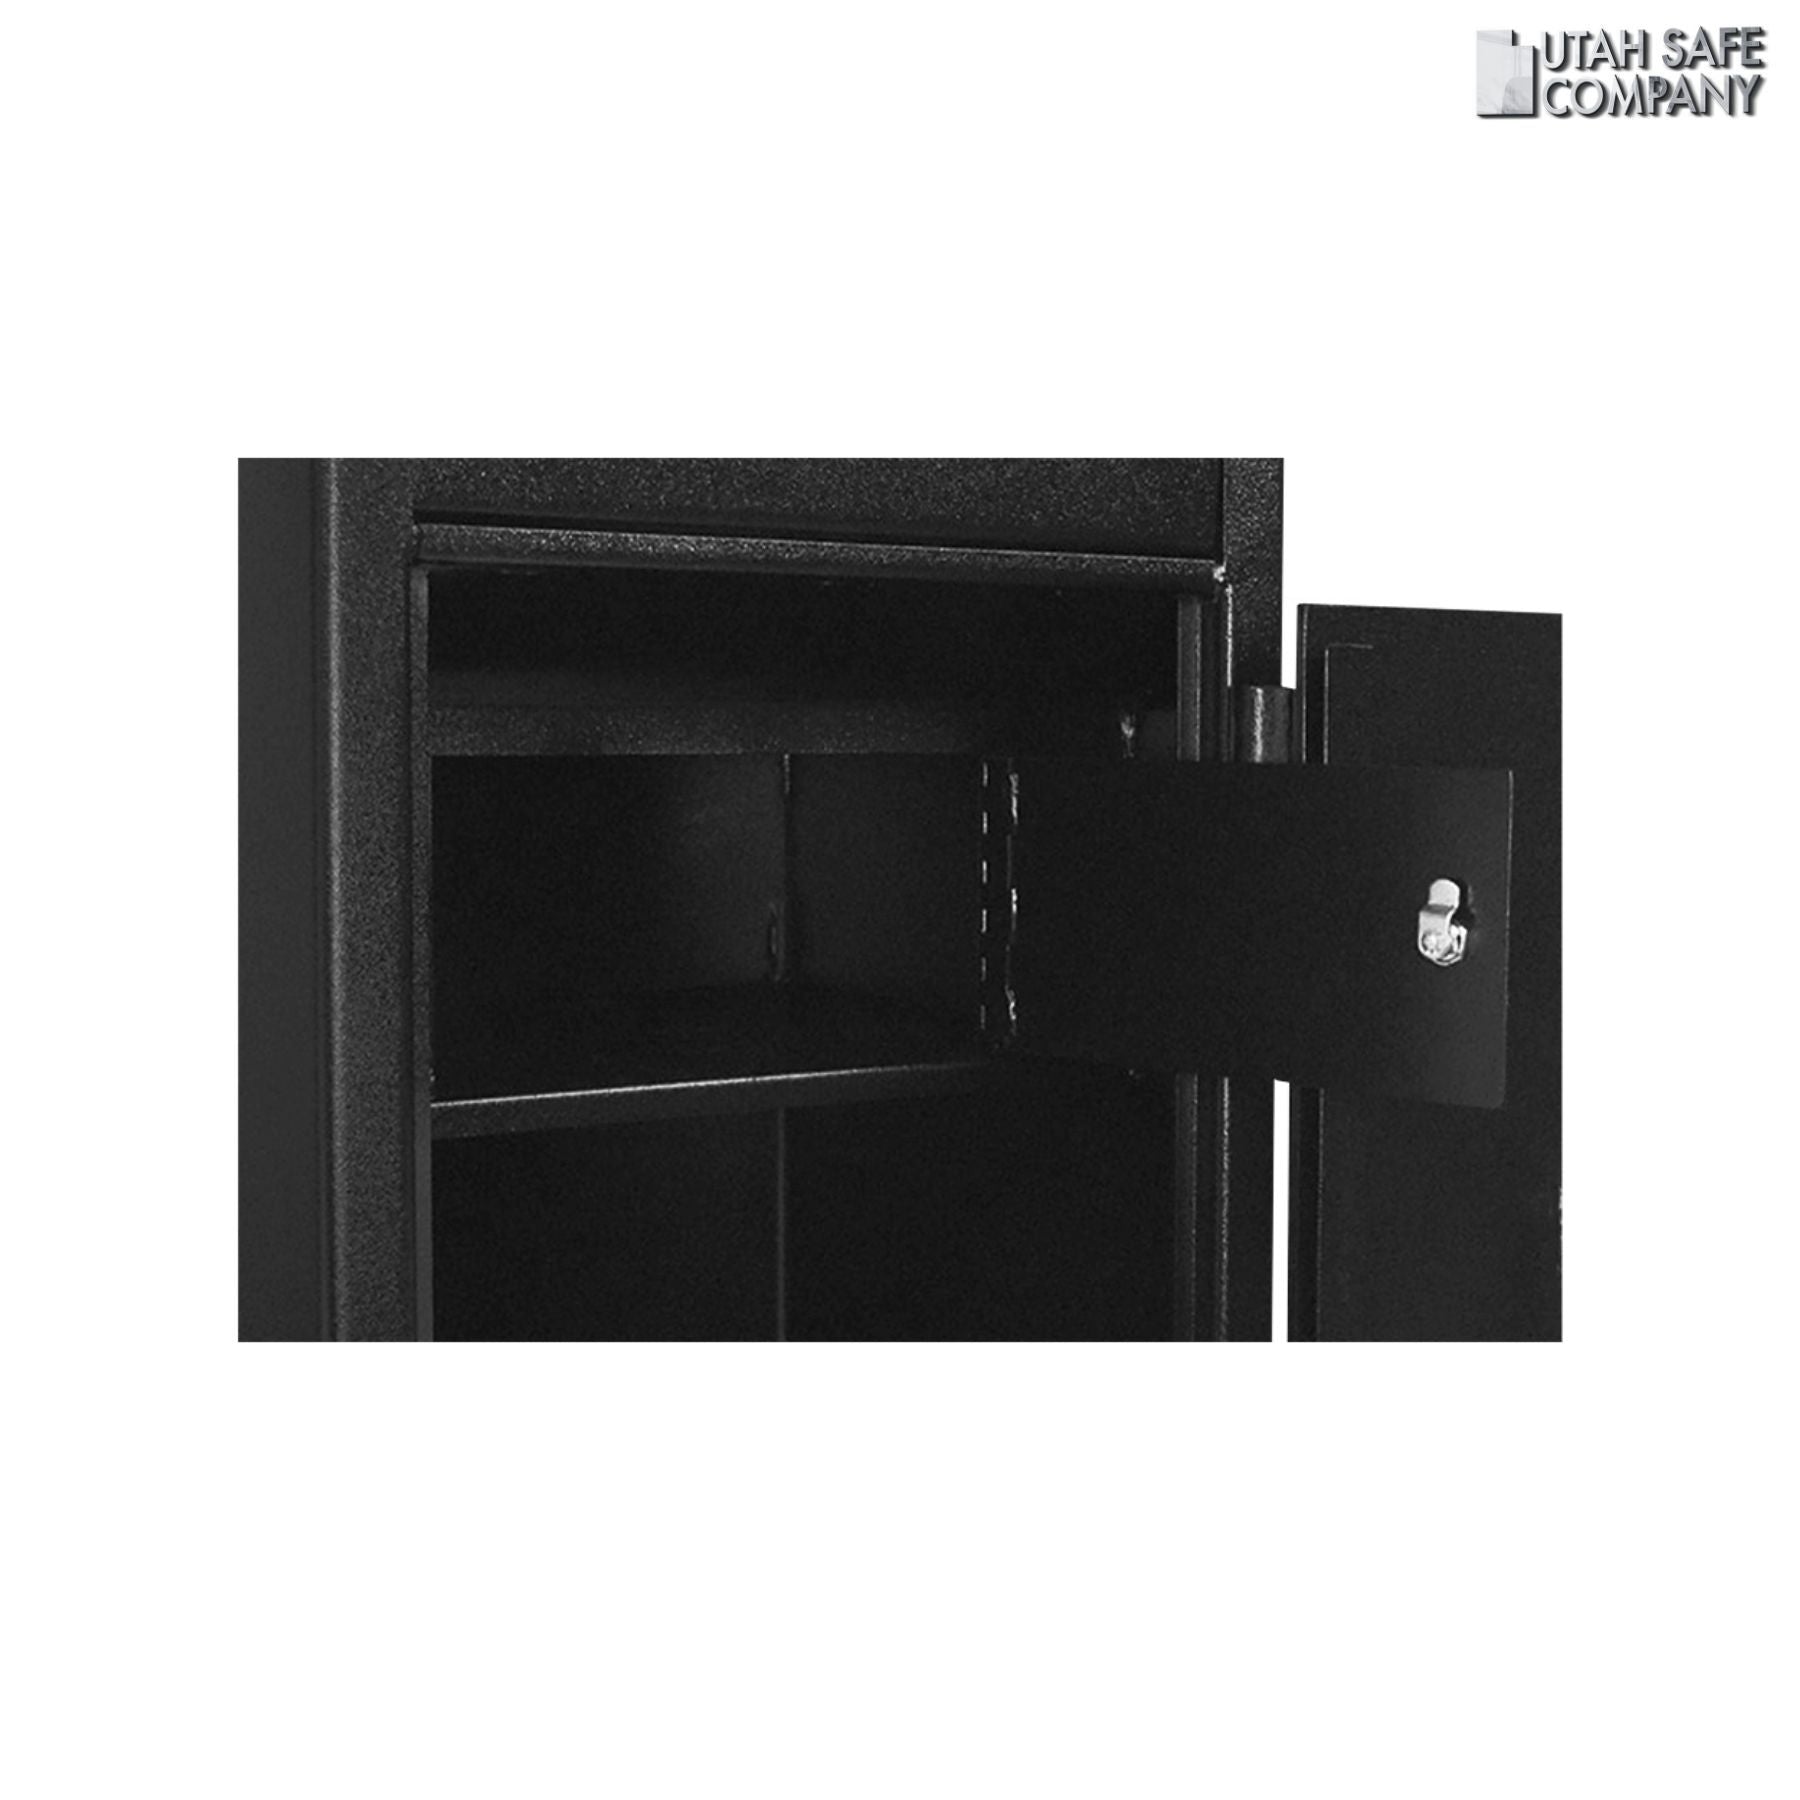 Stealth DS5020FL10 Heavy Duty Depository Safe